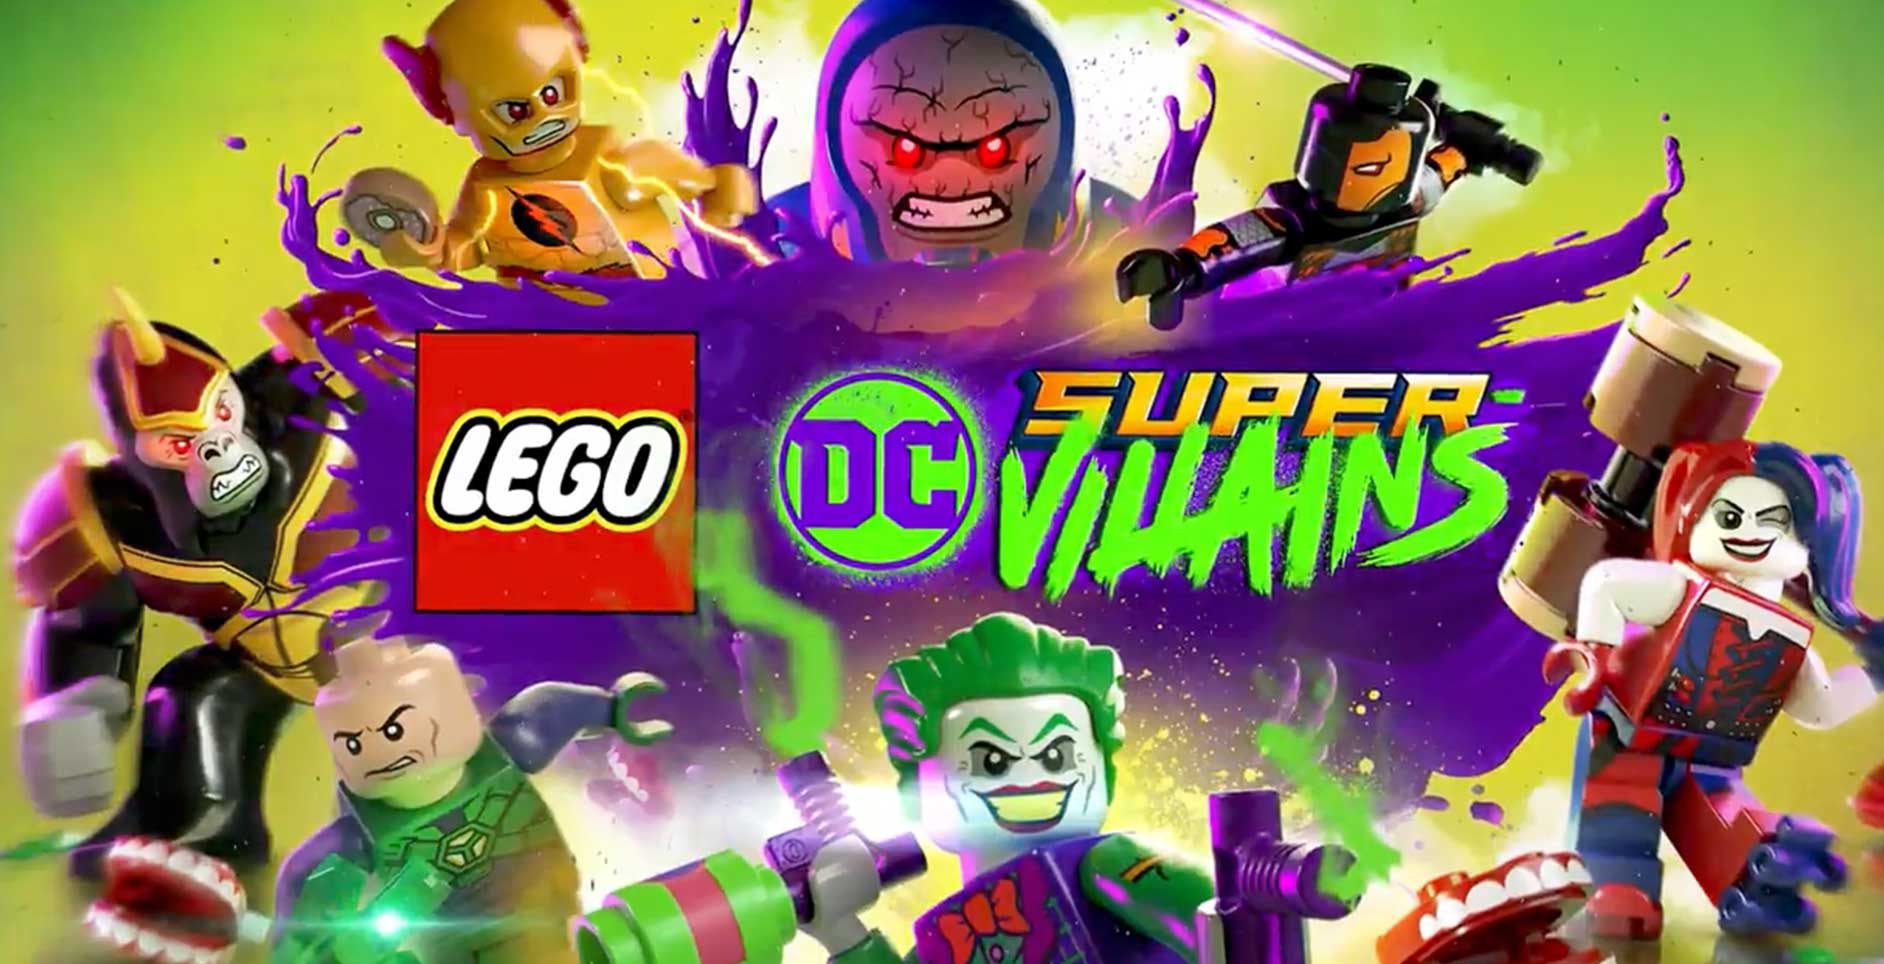 Warner Bros To Release All Of The LEGO DC Super-Villains